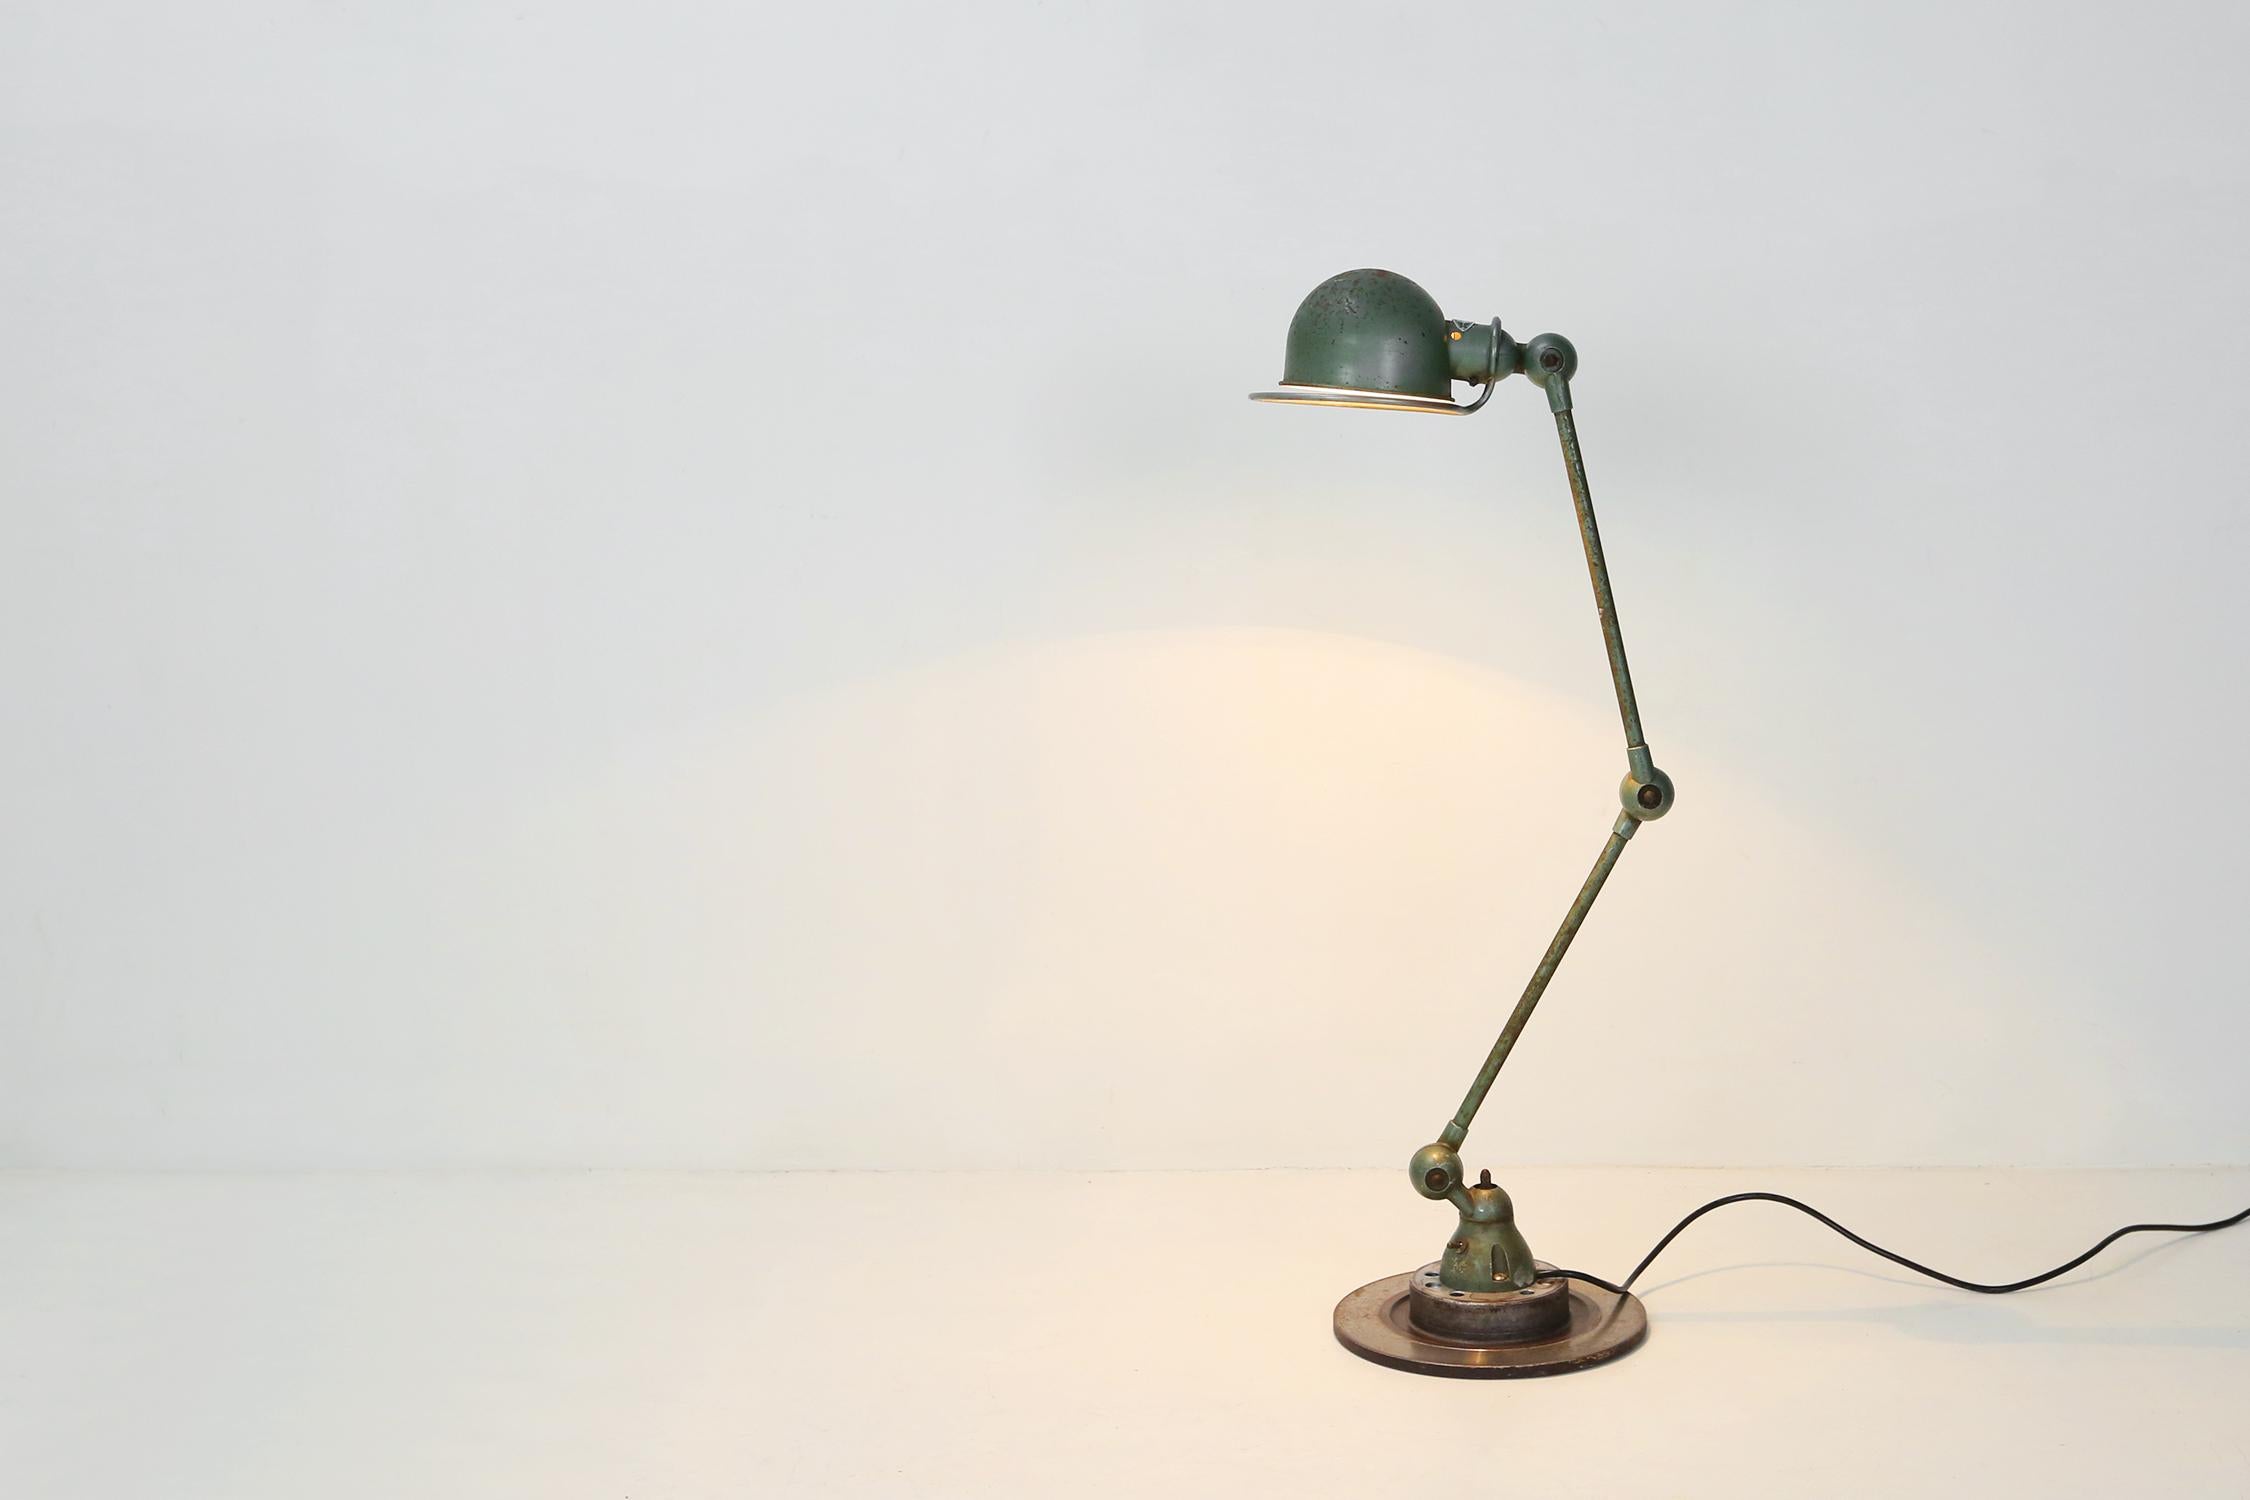 Industrial lamp by the French brand Jieldé.
The lamp is fully original and placed on a solid metal base. The lamp has a great patina and is ready to use.